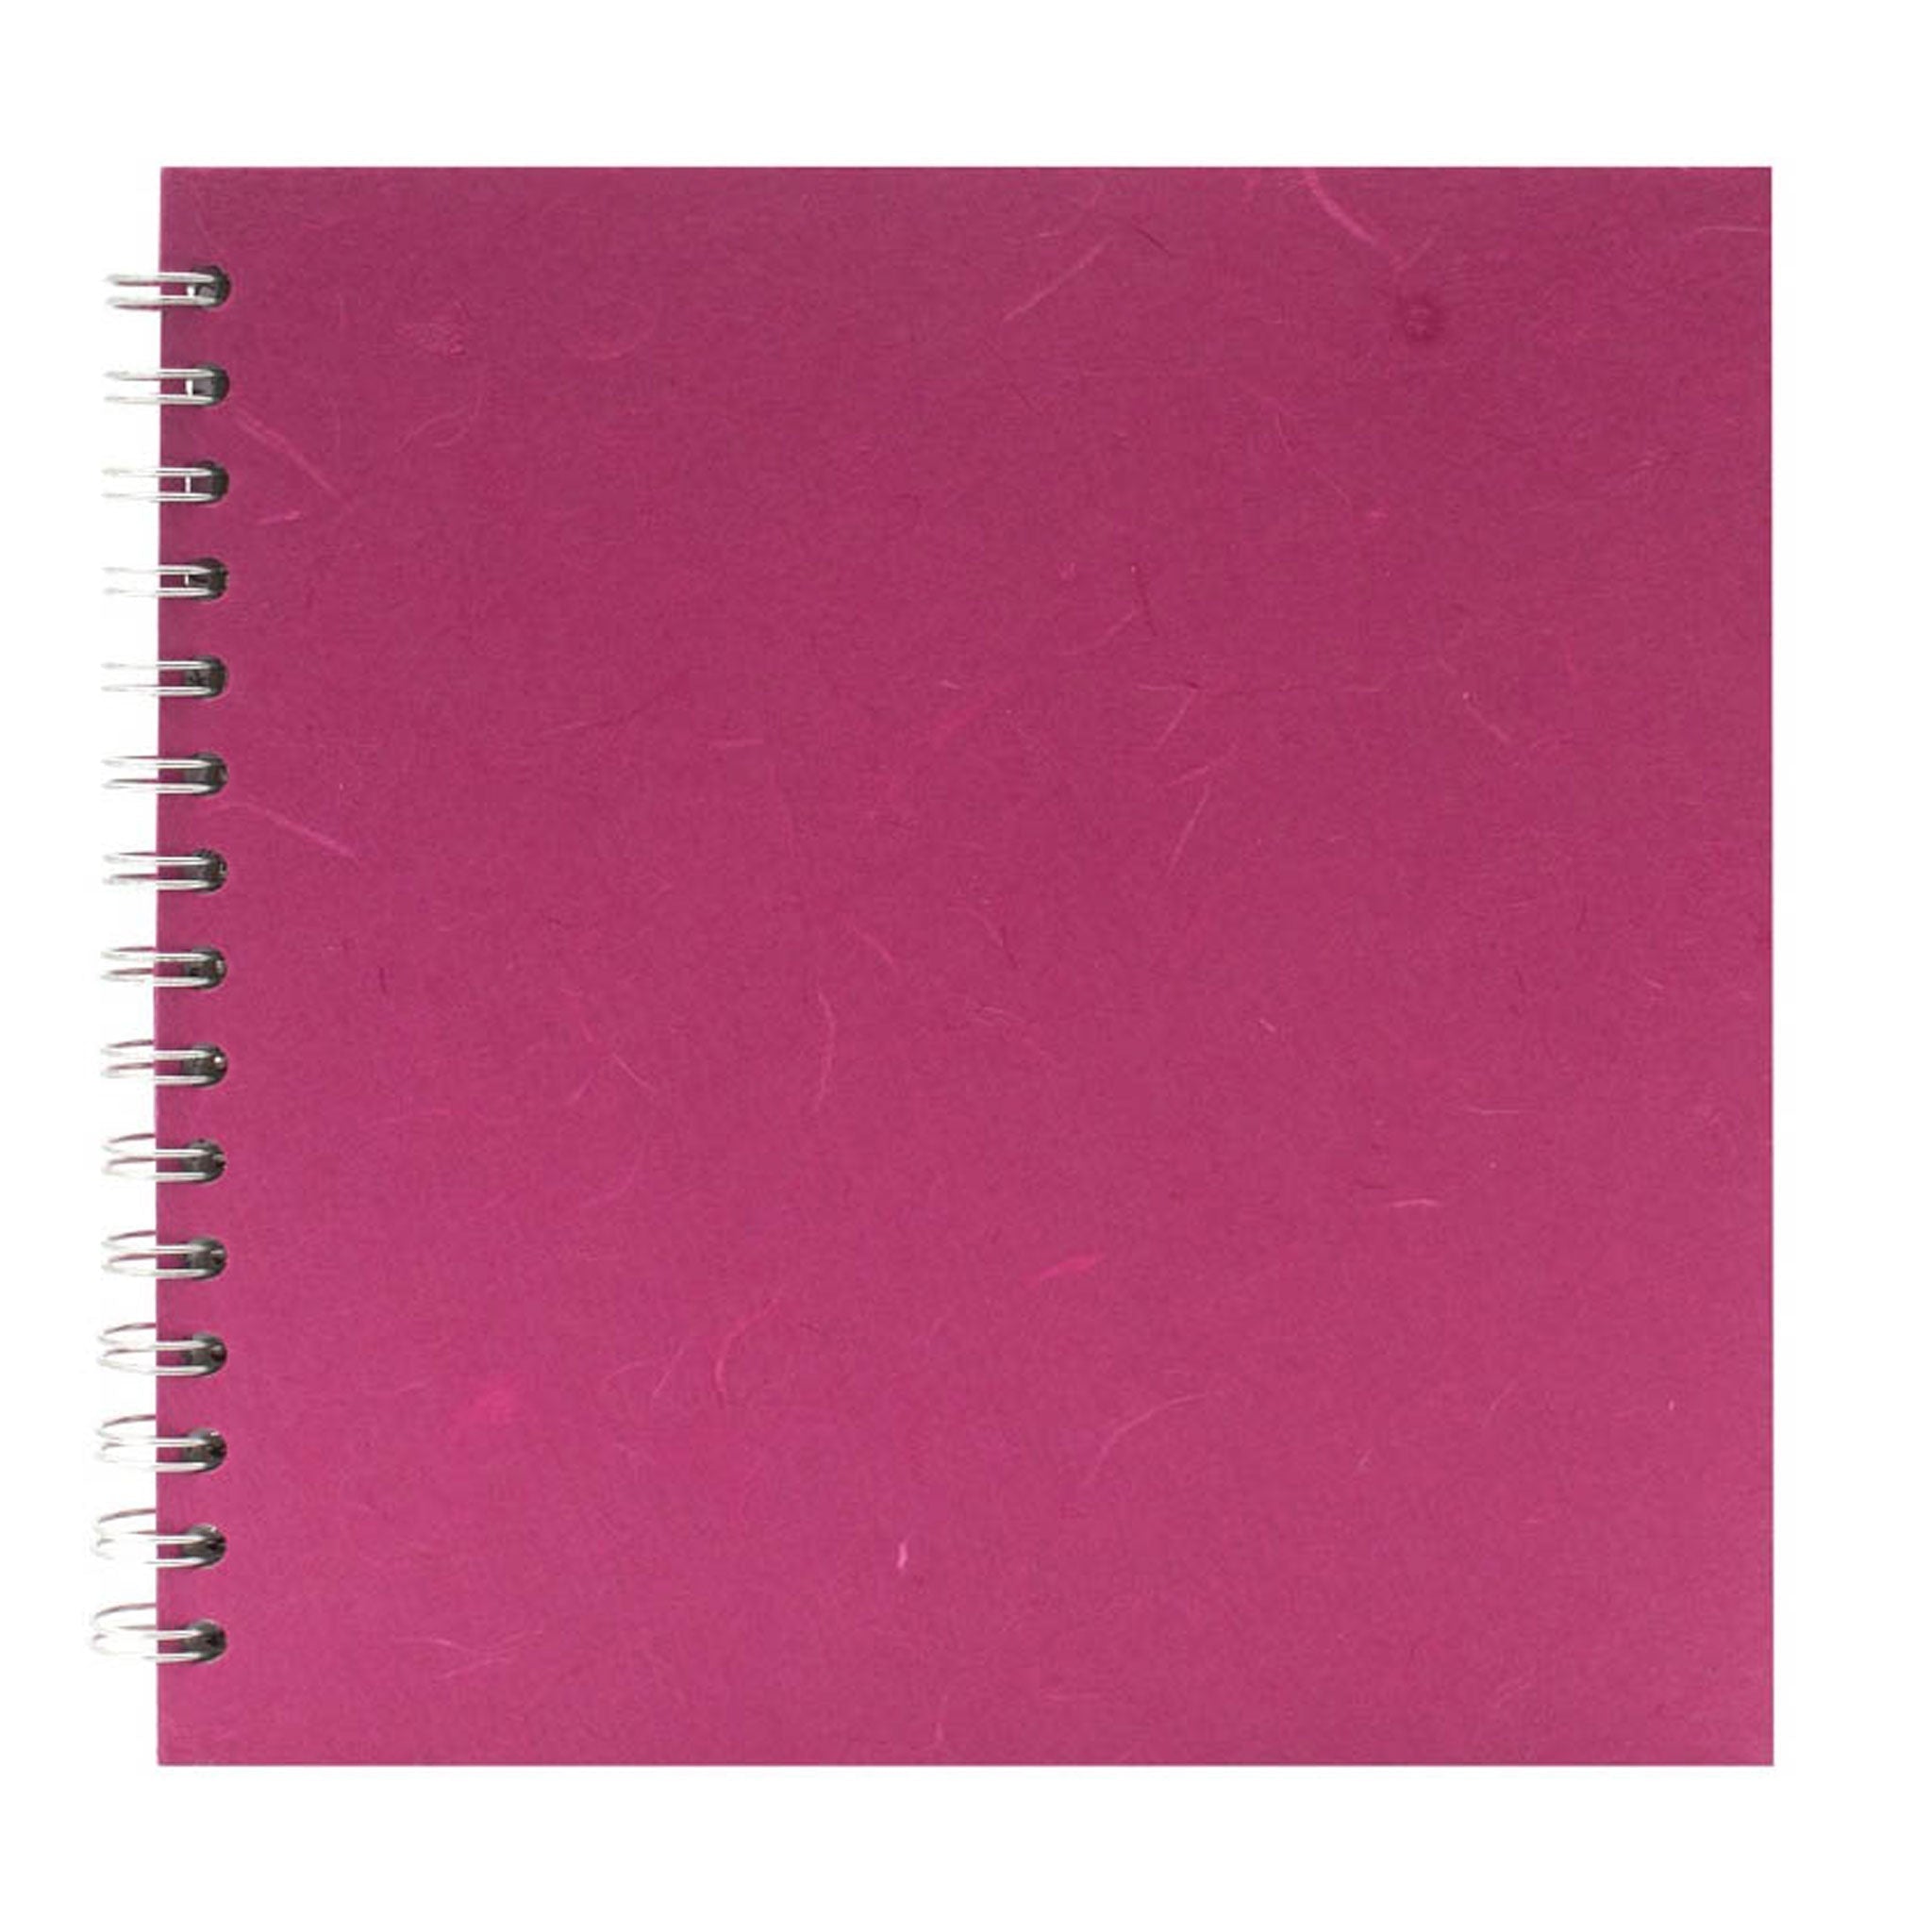 Pink Pig Square 4 x 4 Inch Sketchbook: 35 Pages, 150 gsm – Perfect